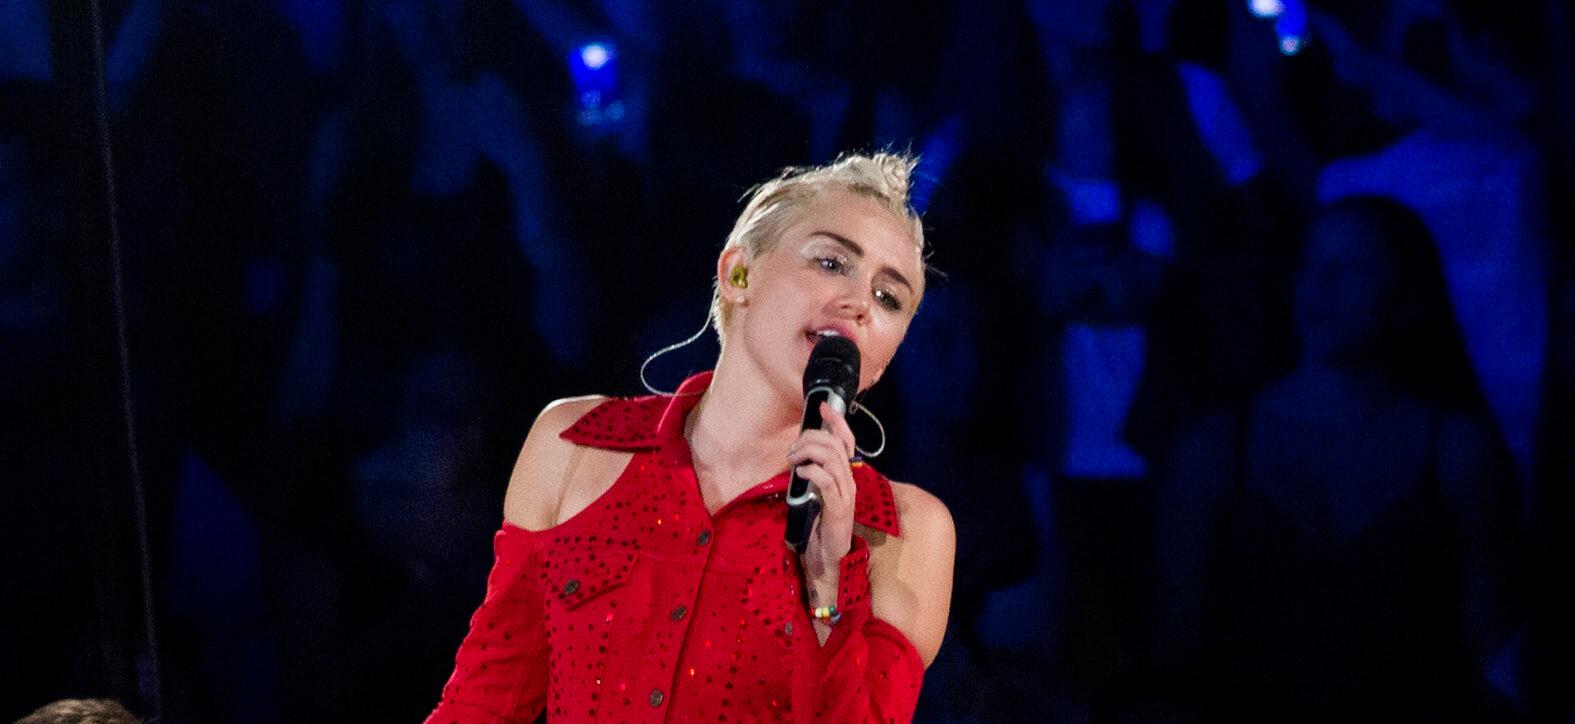 The Countdown To Miley Cyrus’ ‘Flowers’ Is On!